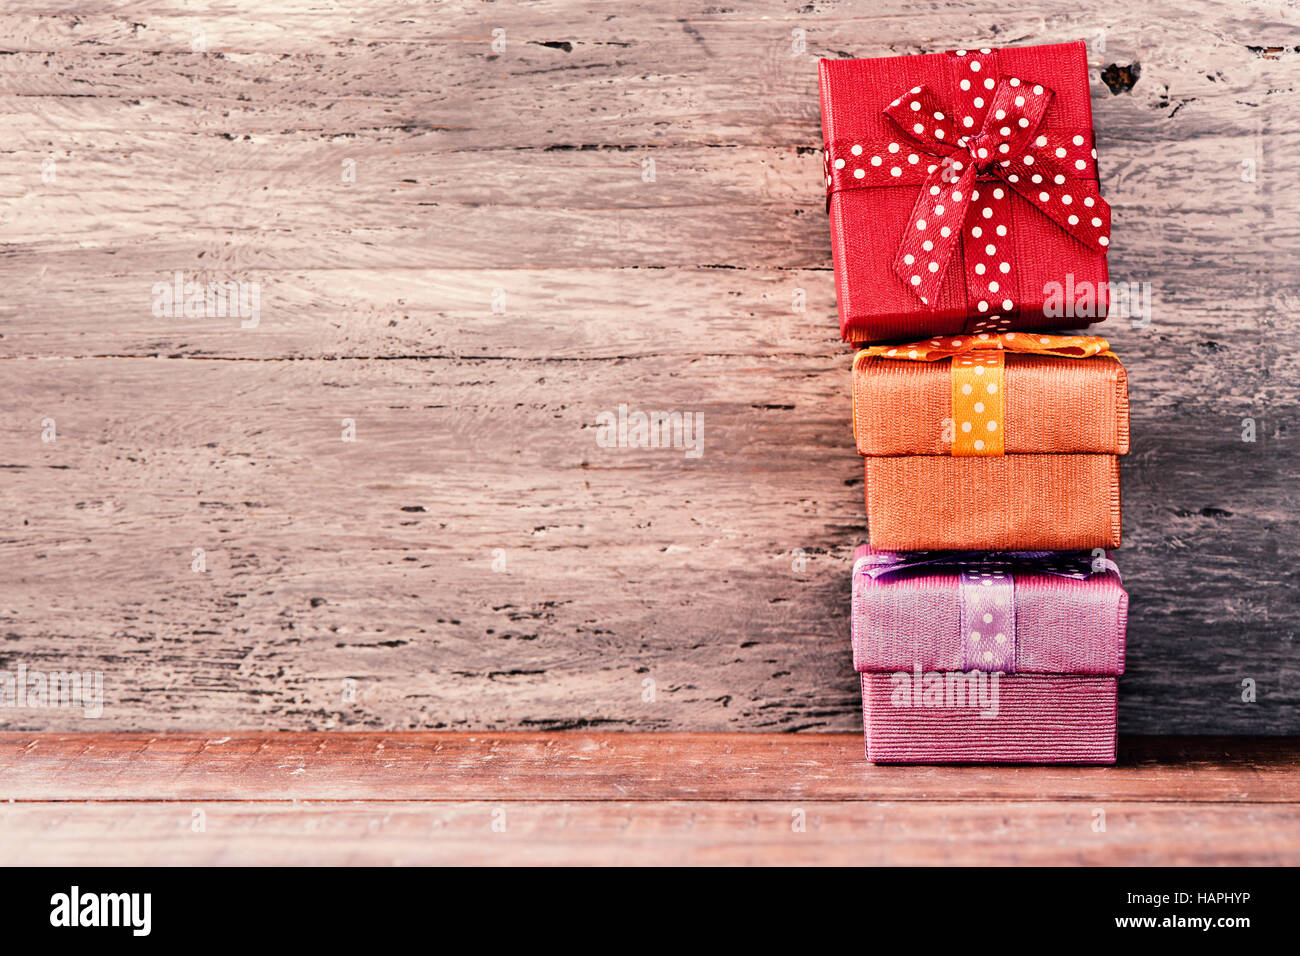 a stack of some cozy gifts wrapped in different papers and tied with ribbons of different colors on a rustic wooden surface, with a negative space Stock Photo